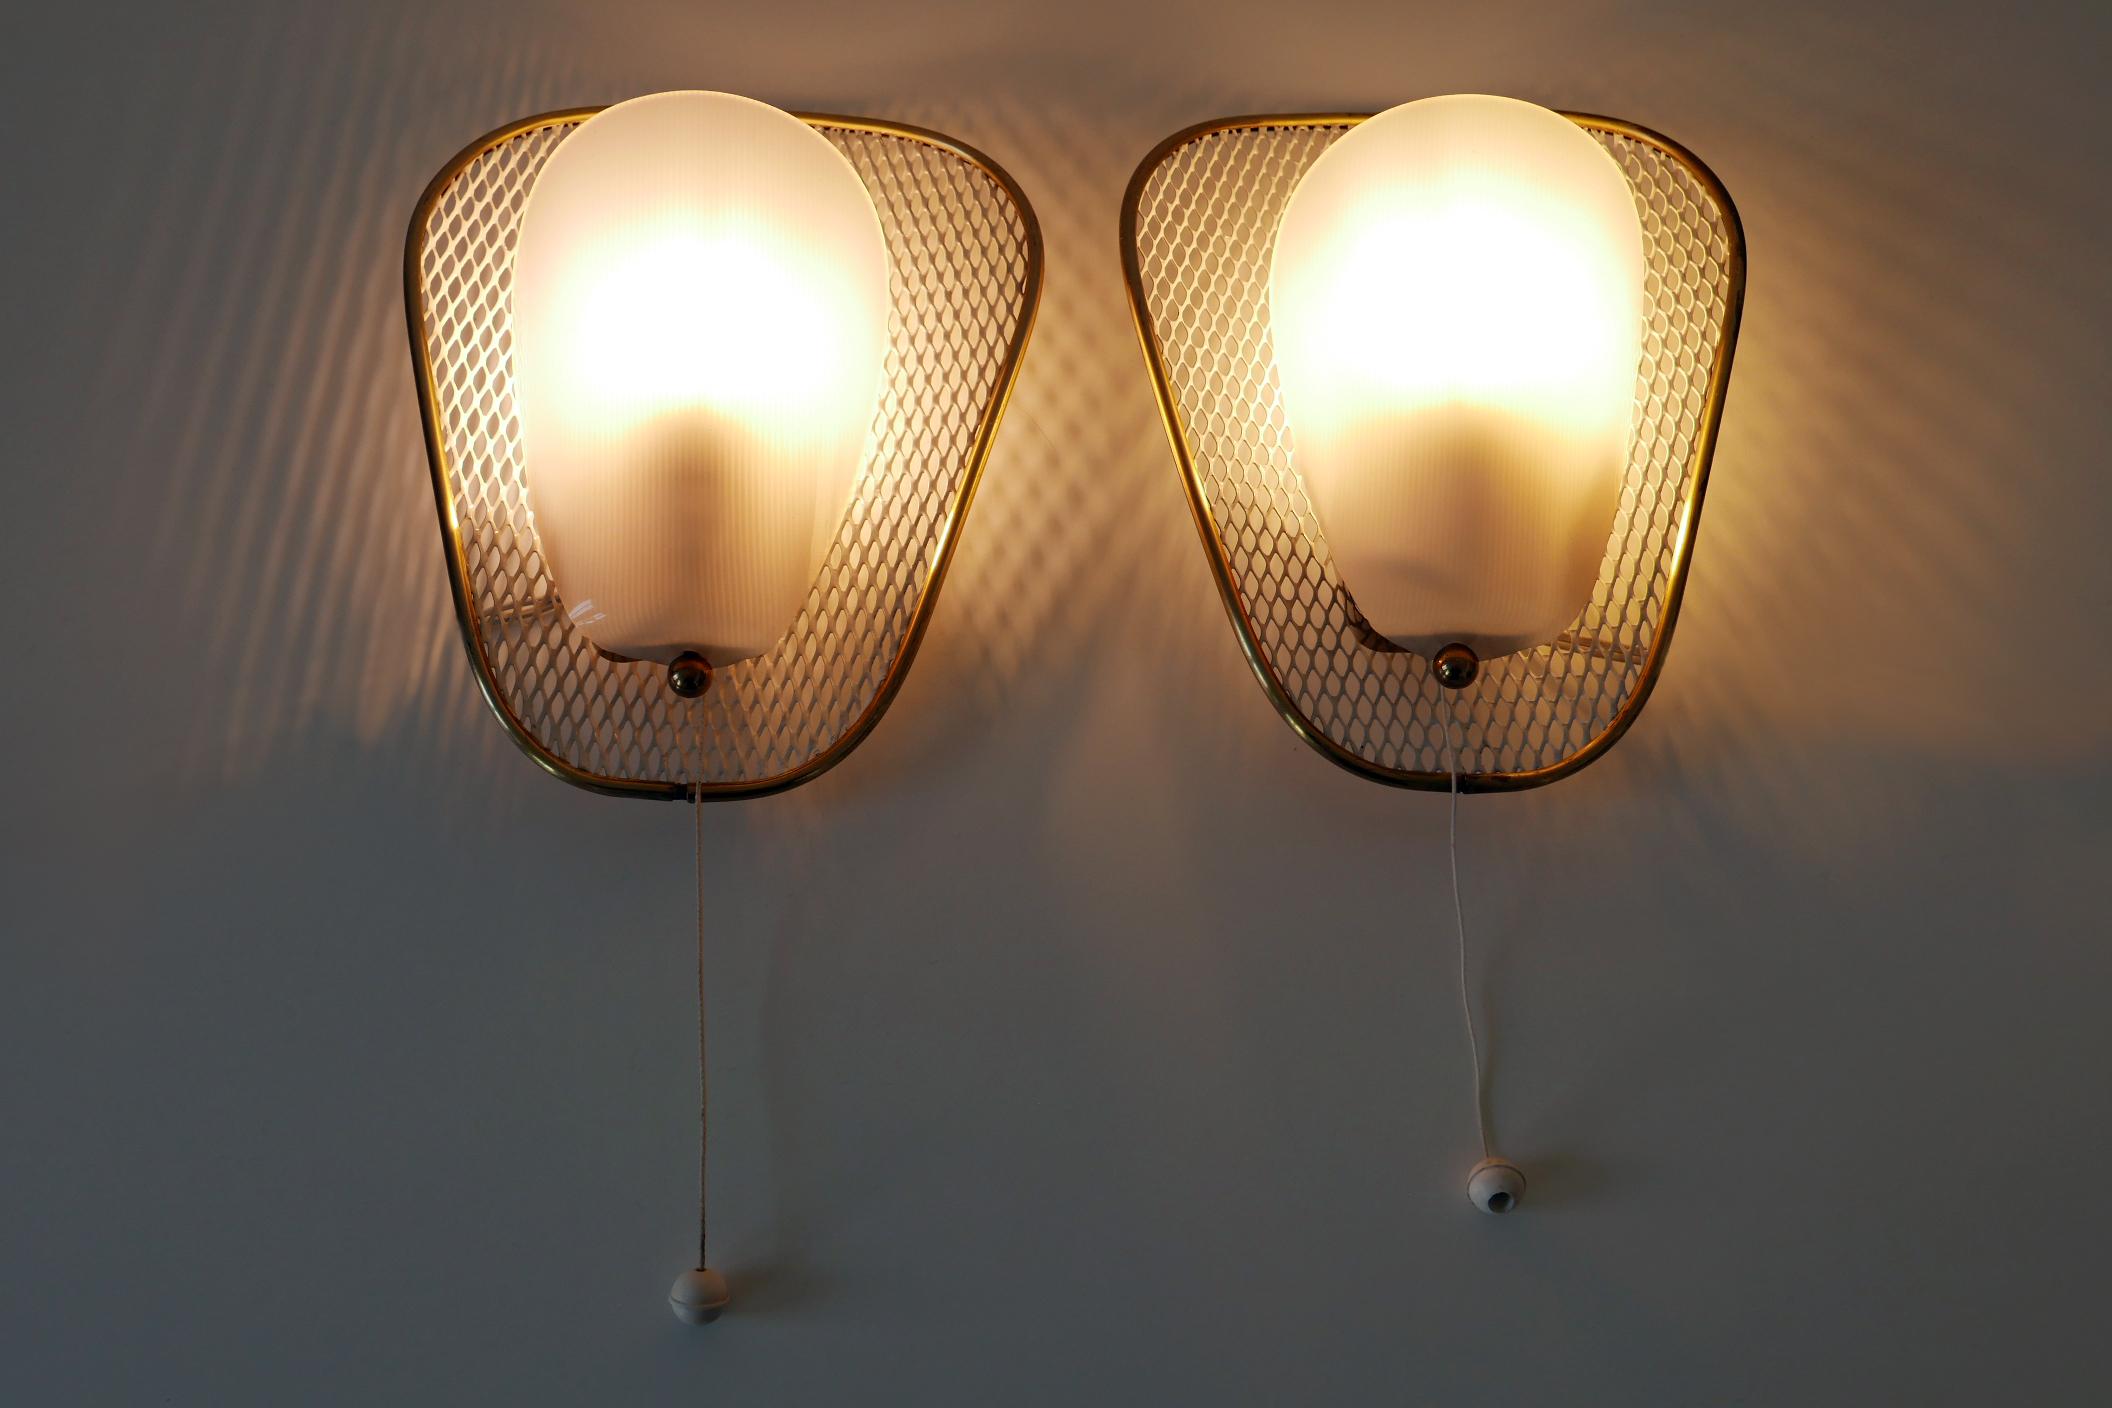 Set of Two Rare & Elegant Mid-Century Modern Sconces or Wall Lamps Germany 1950s For Sale 3